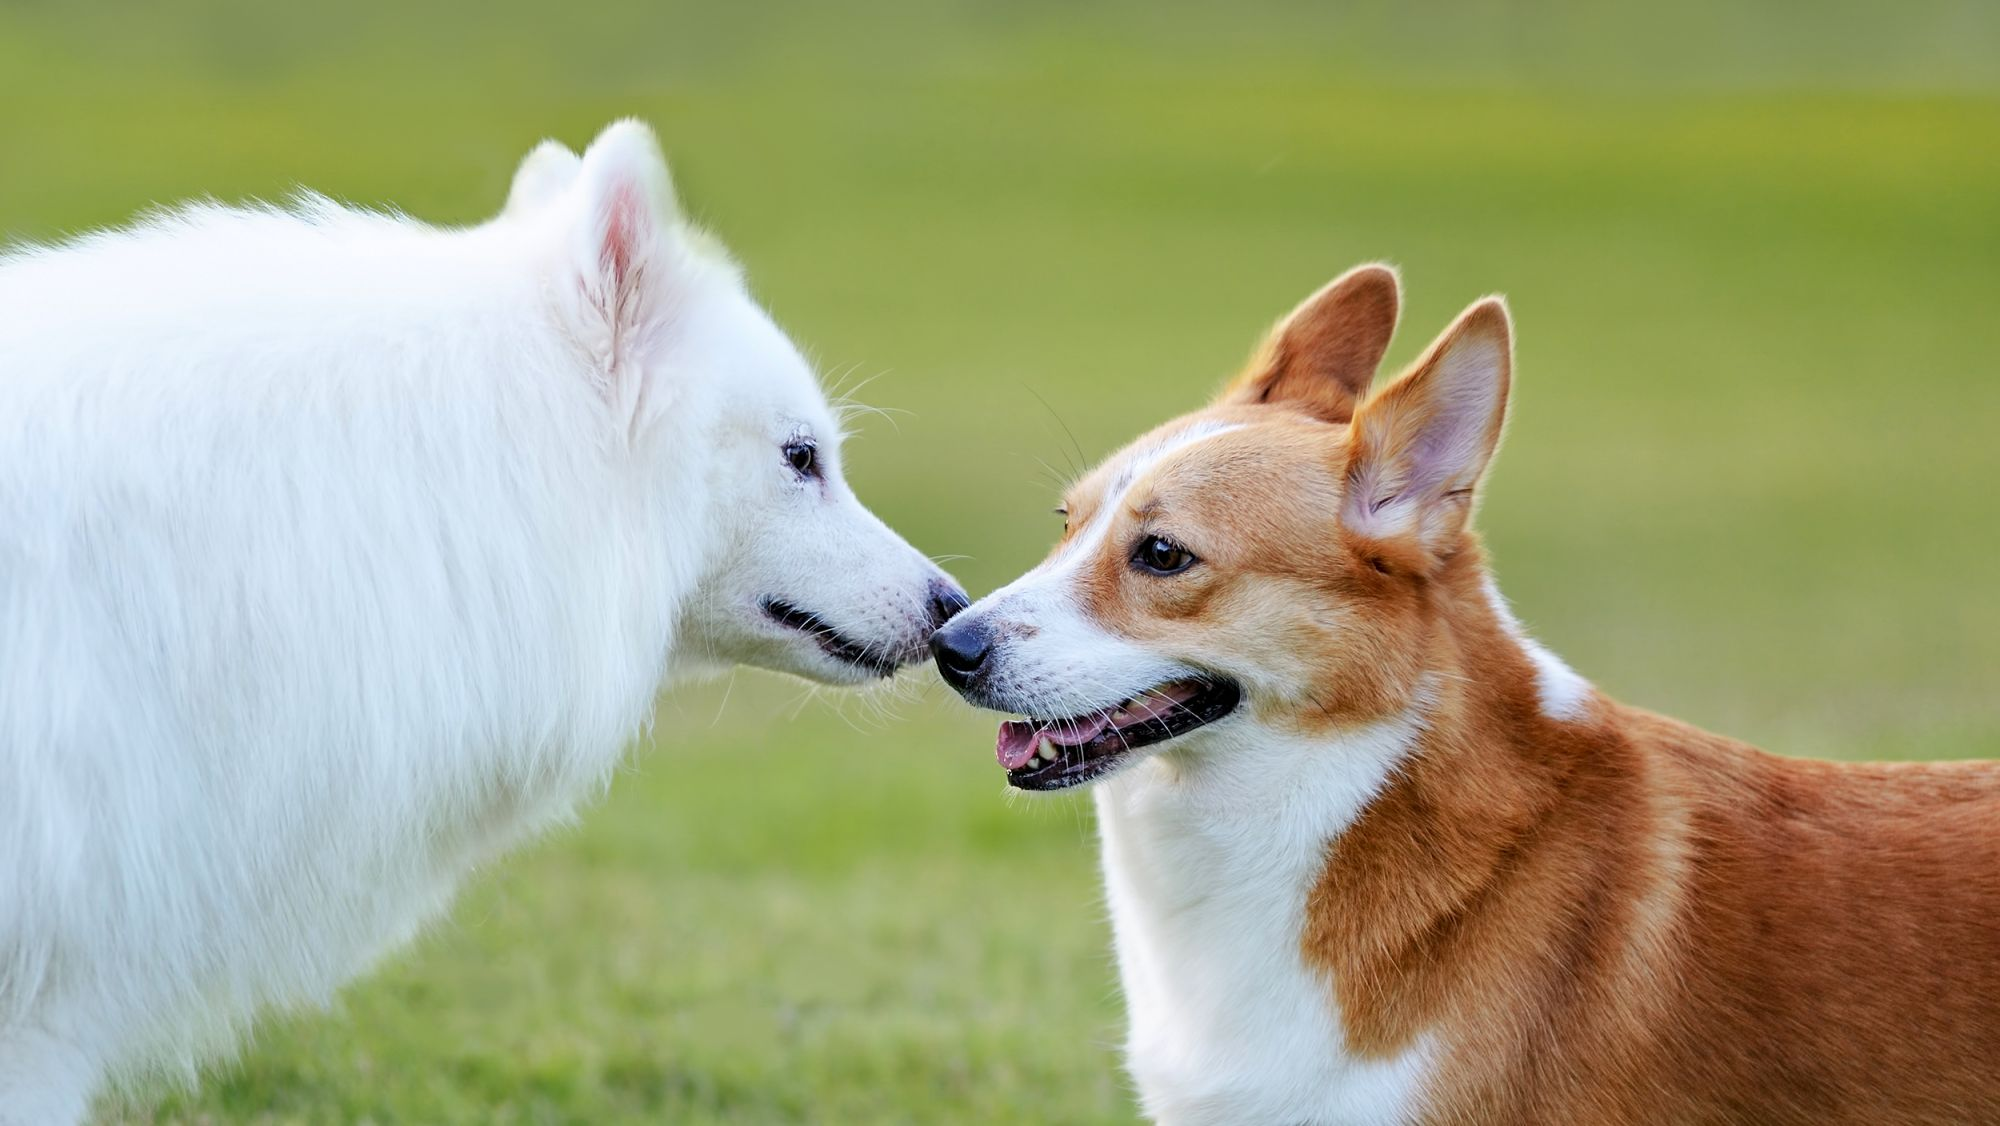 Adult Welsh Corgi Cardigan standing outdoors being introduced to a white dog.